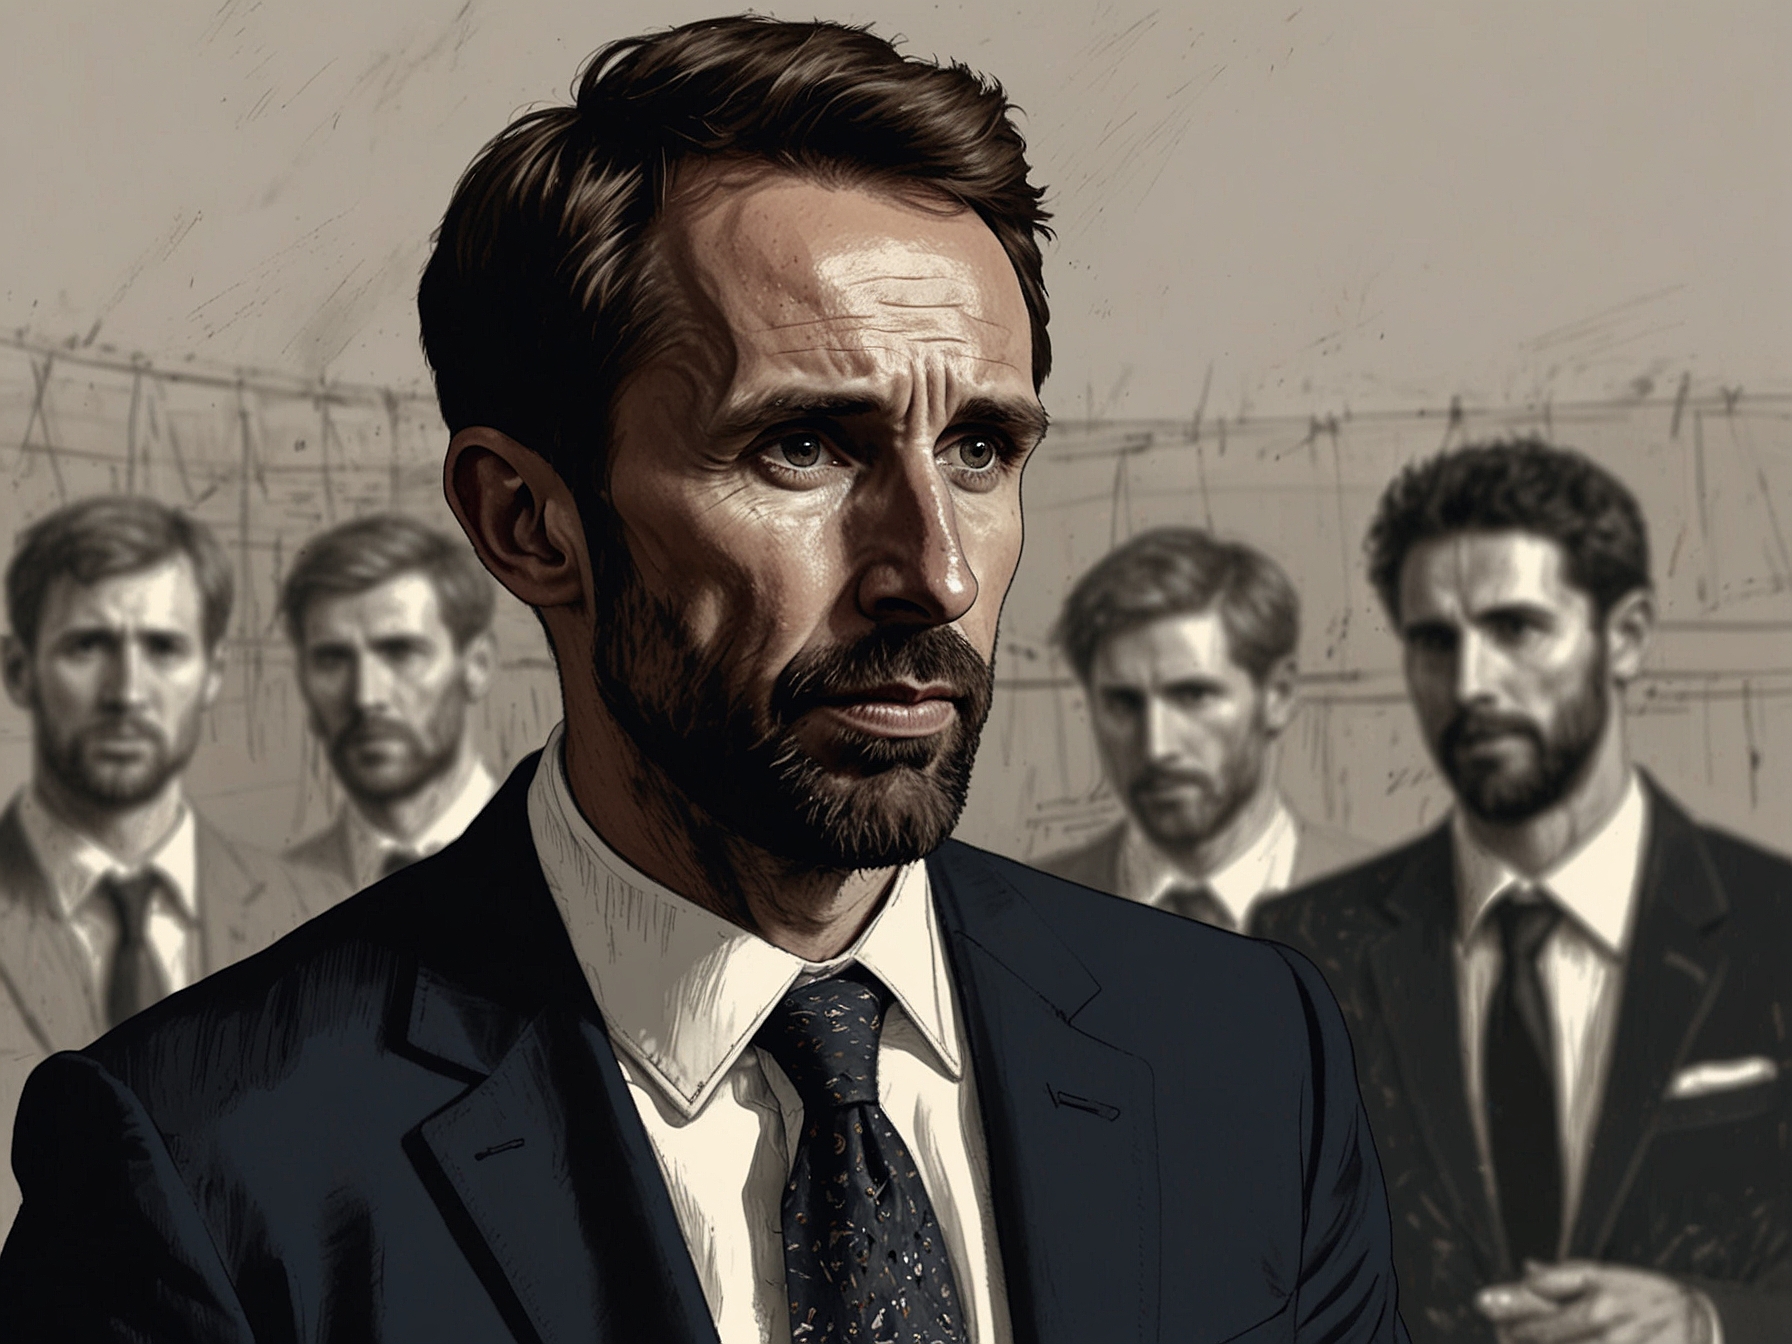 England's coach Gareth Southgate addresses the media post-match, emphasizing the team's defensive strategies while reflecting on their 1-1 draw result, capturing the nation's mixed reactions.